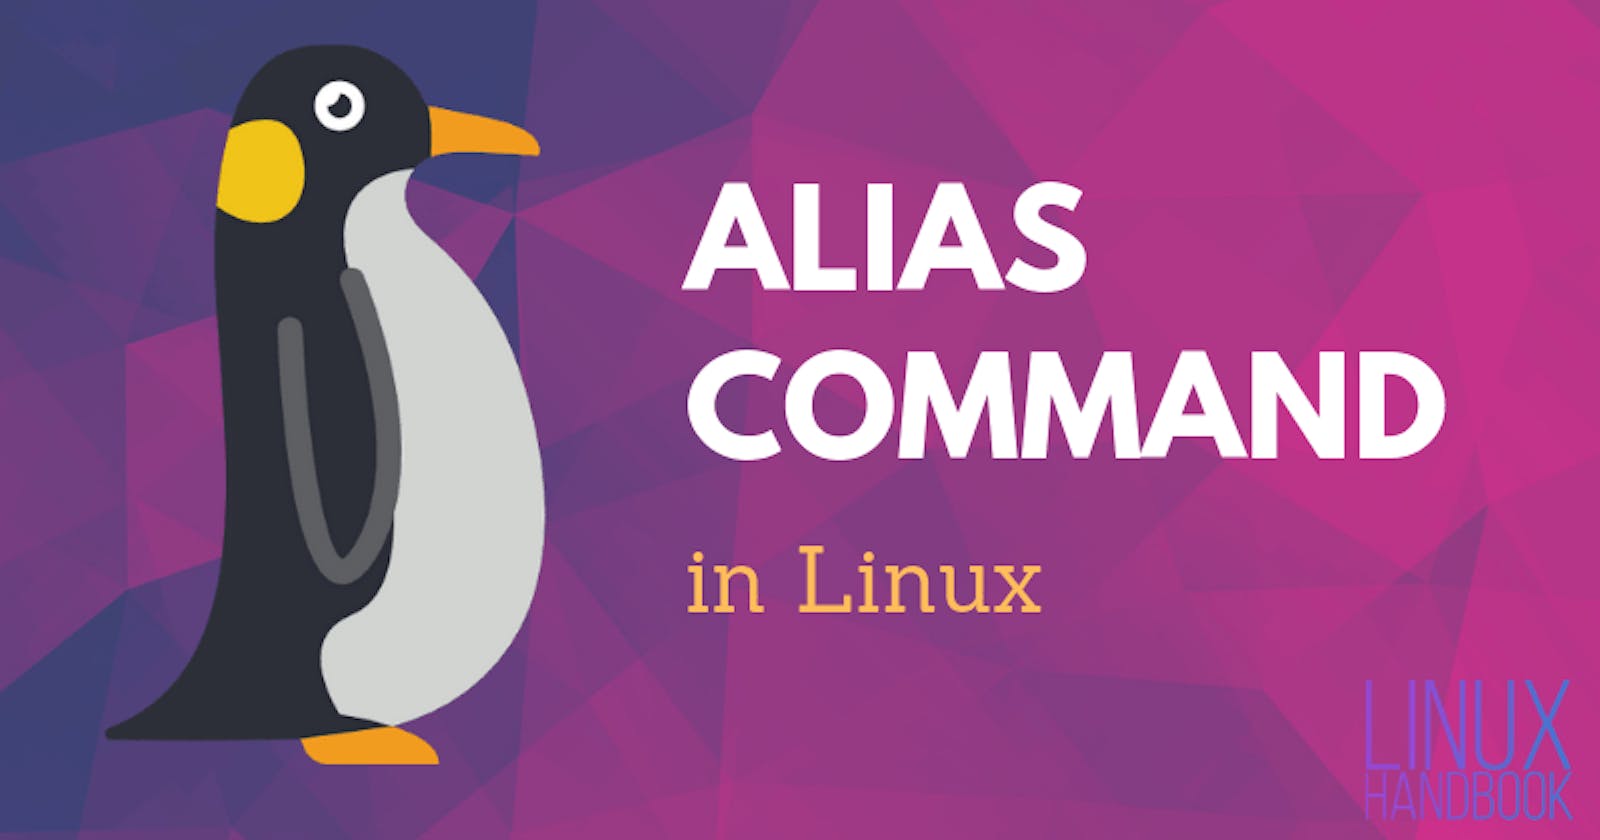 The Alias Command in Linux